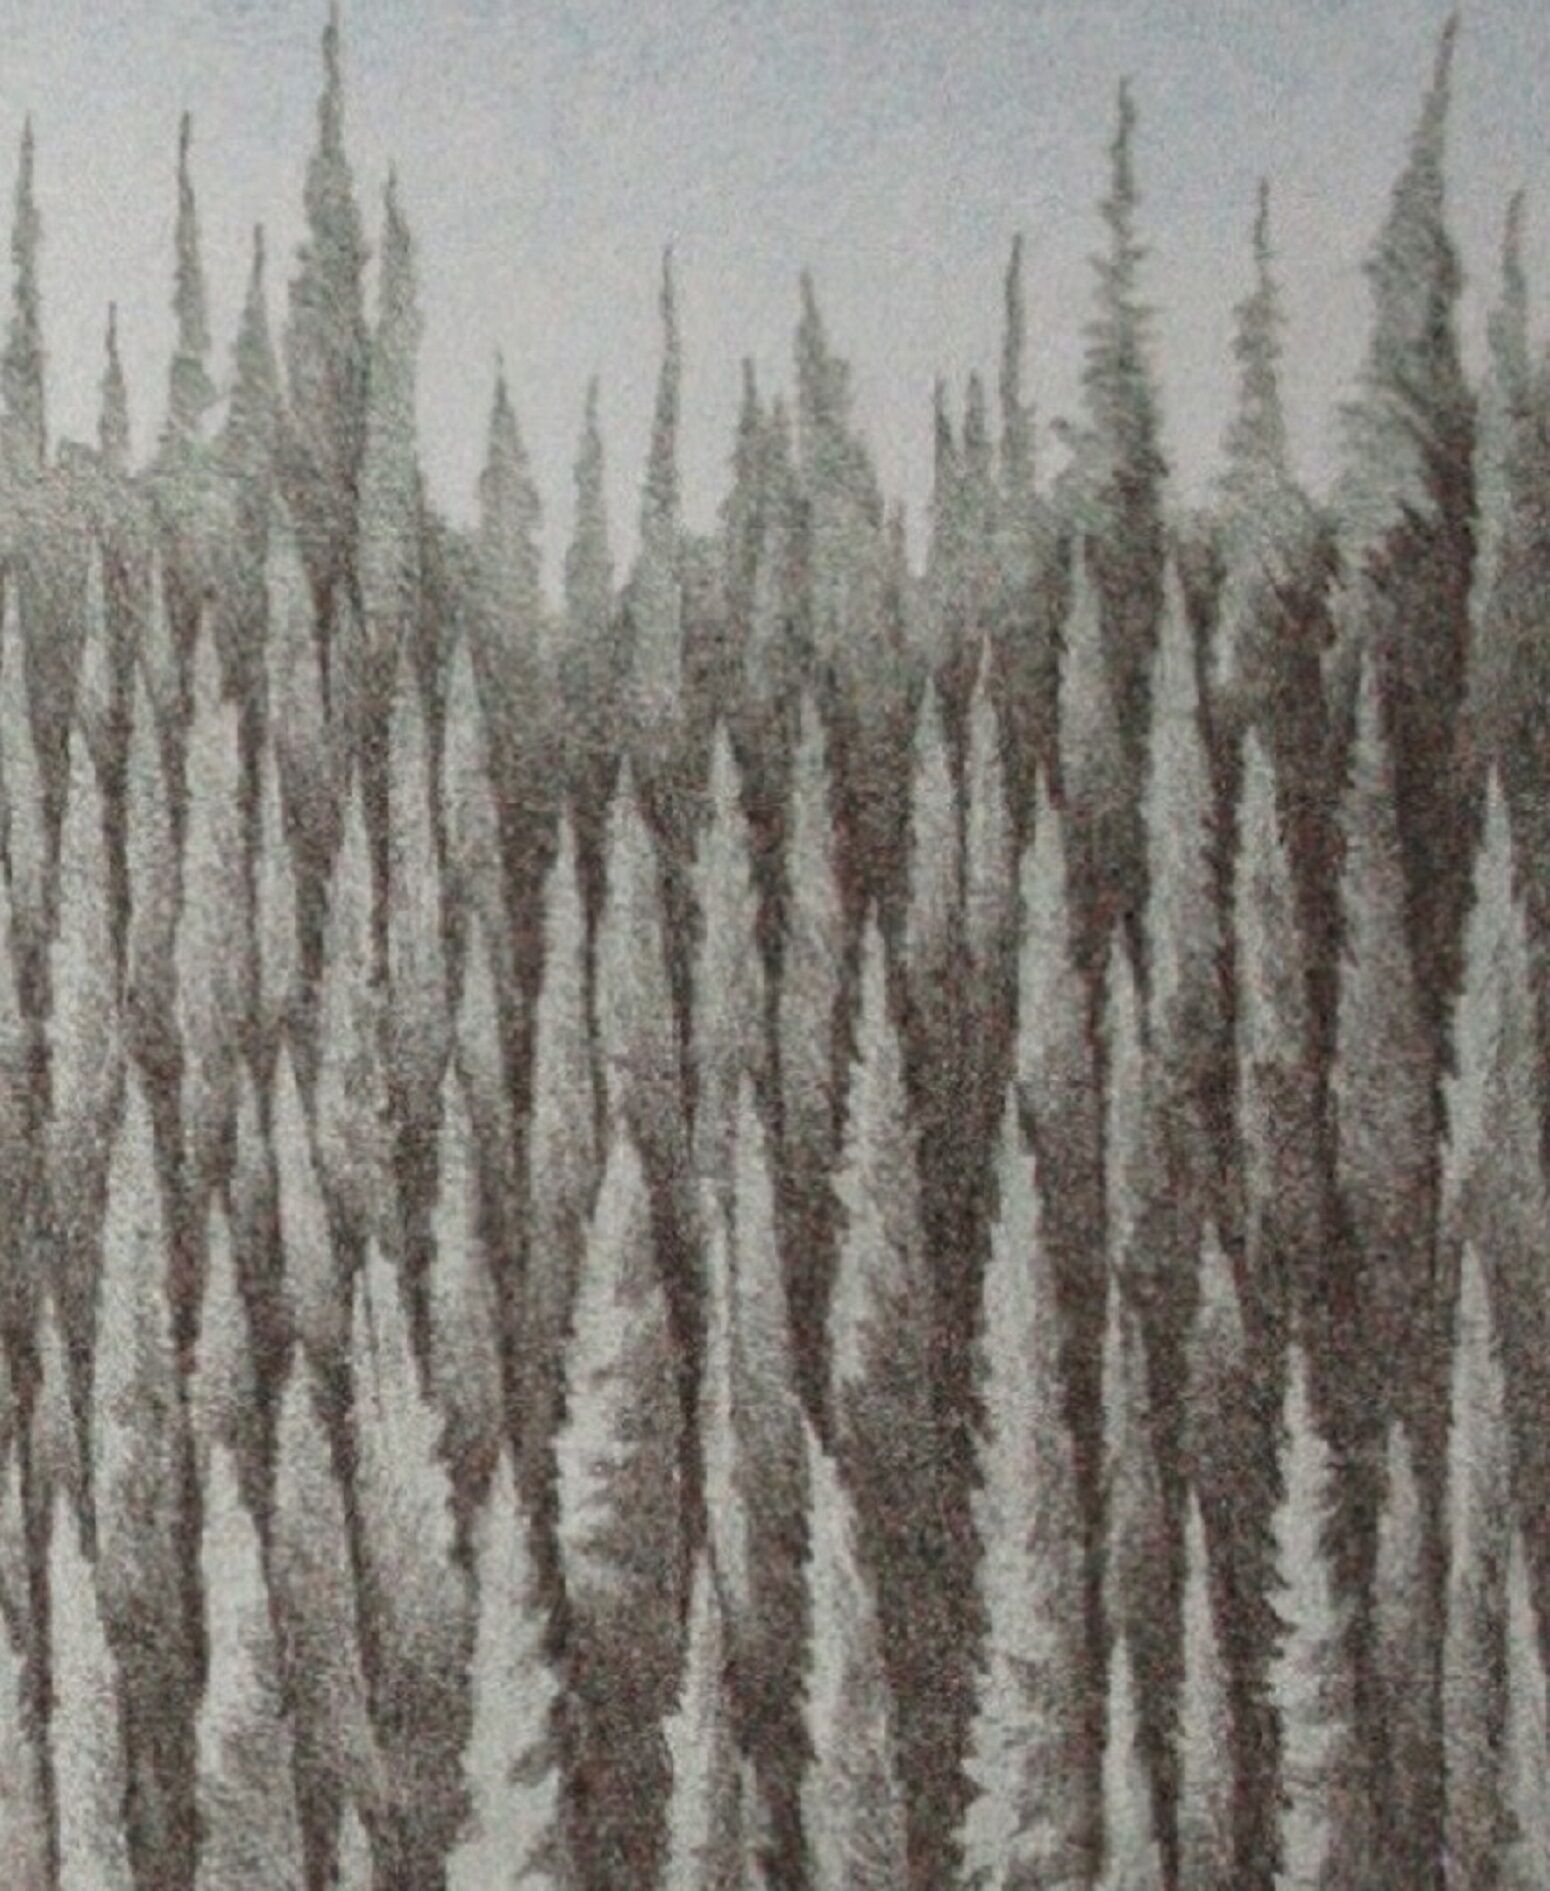 Picture "Man, Wood, Forest" (2013)